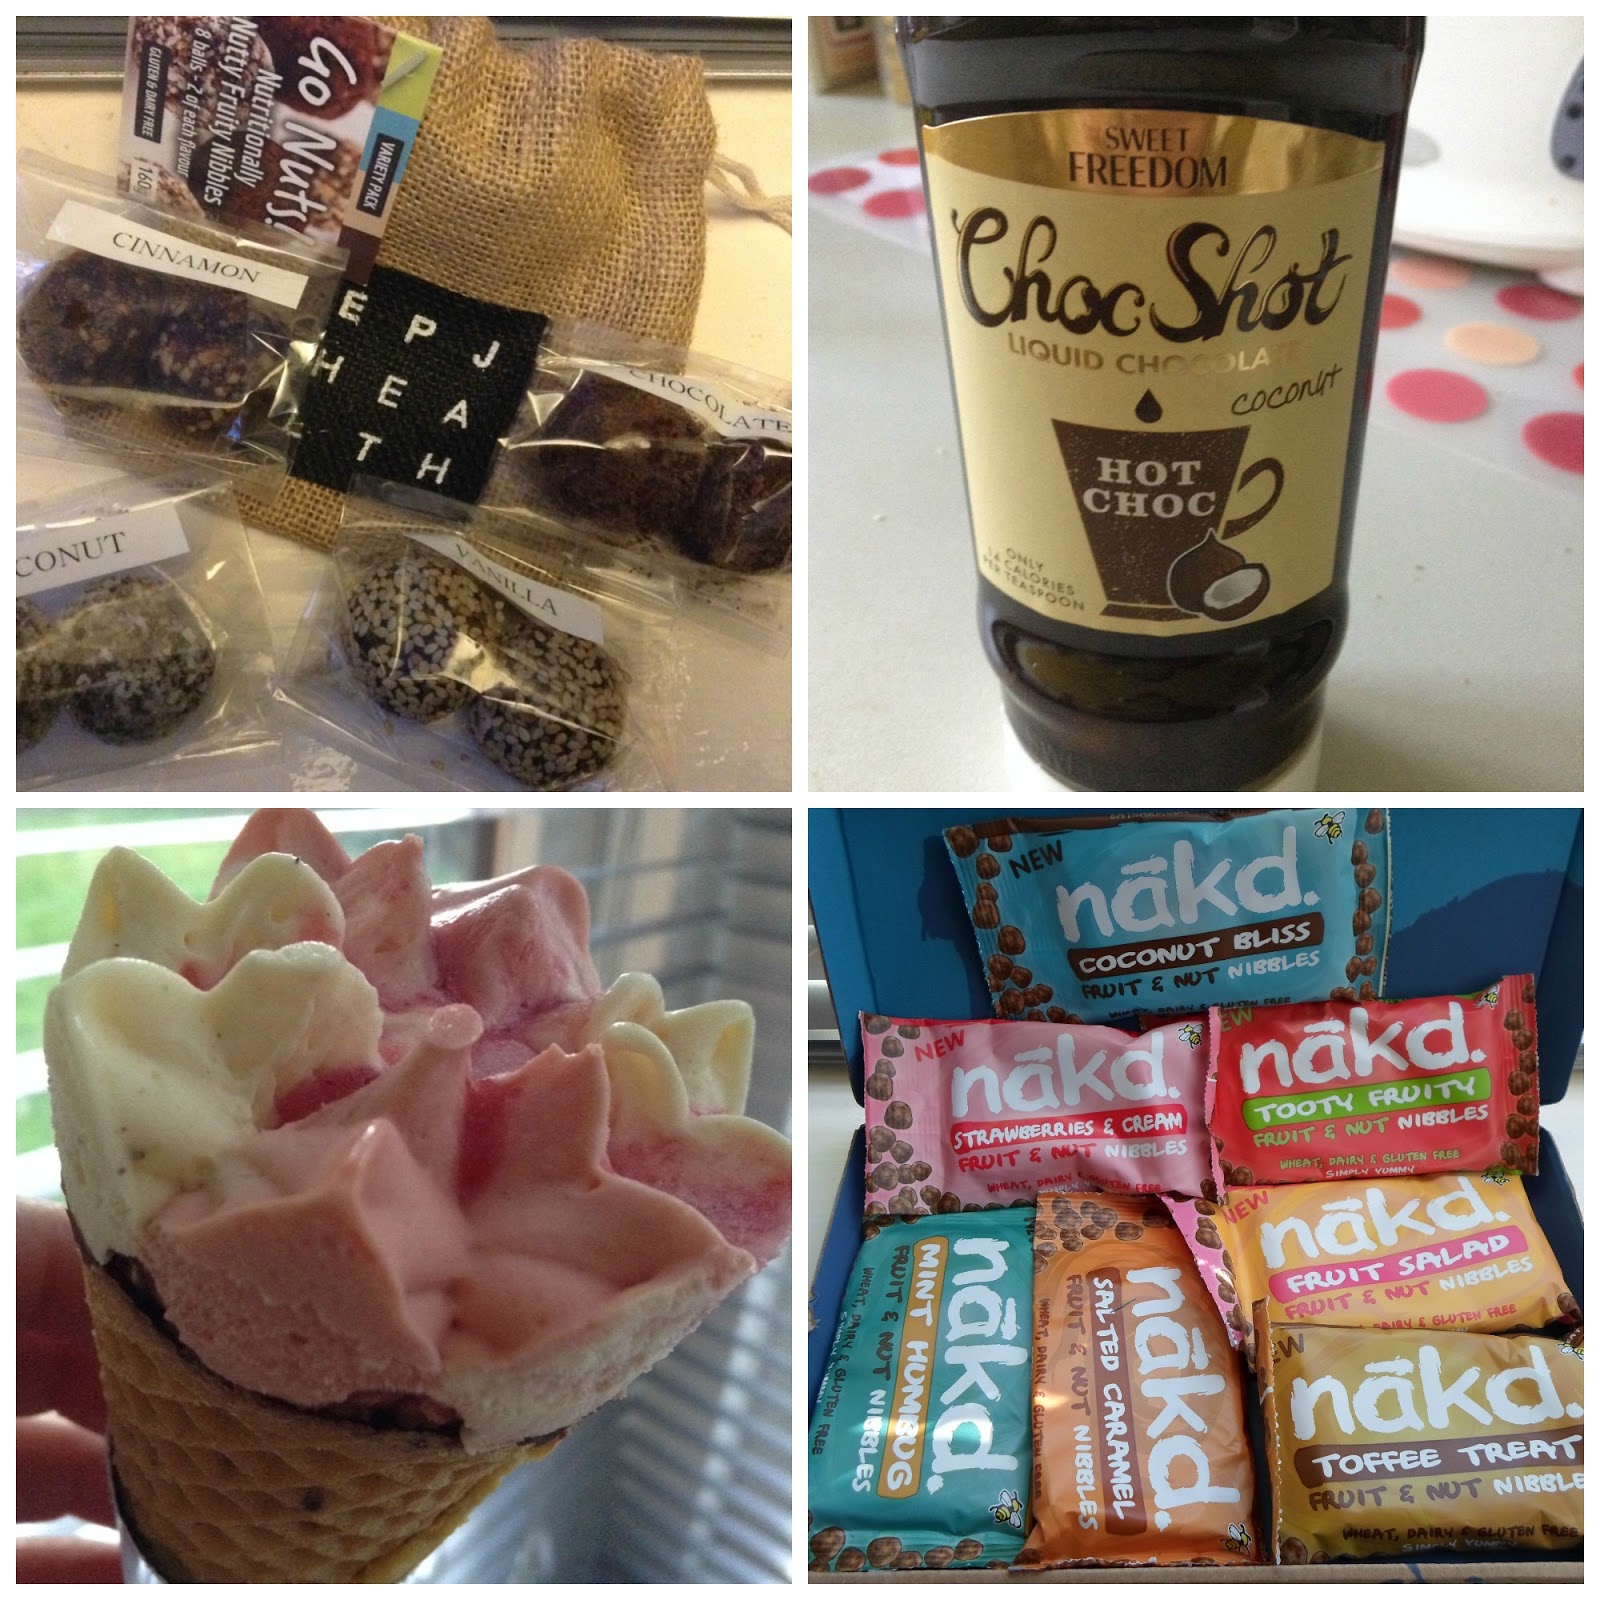 Free From Product Nakd, Choc Shot, Tesco Cones, Go Nuts!